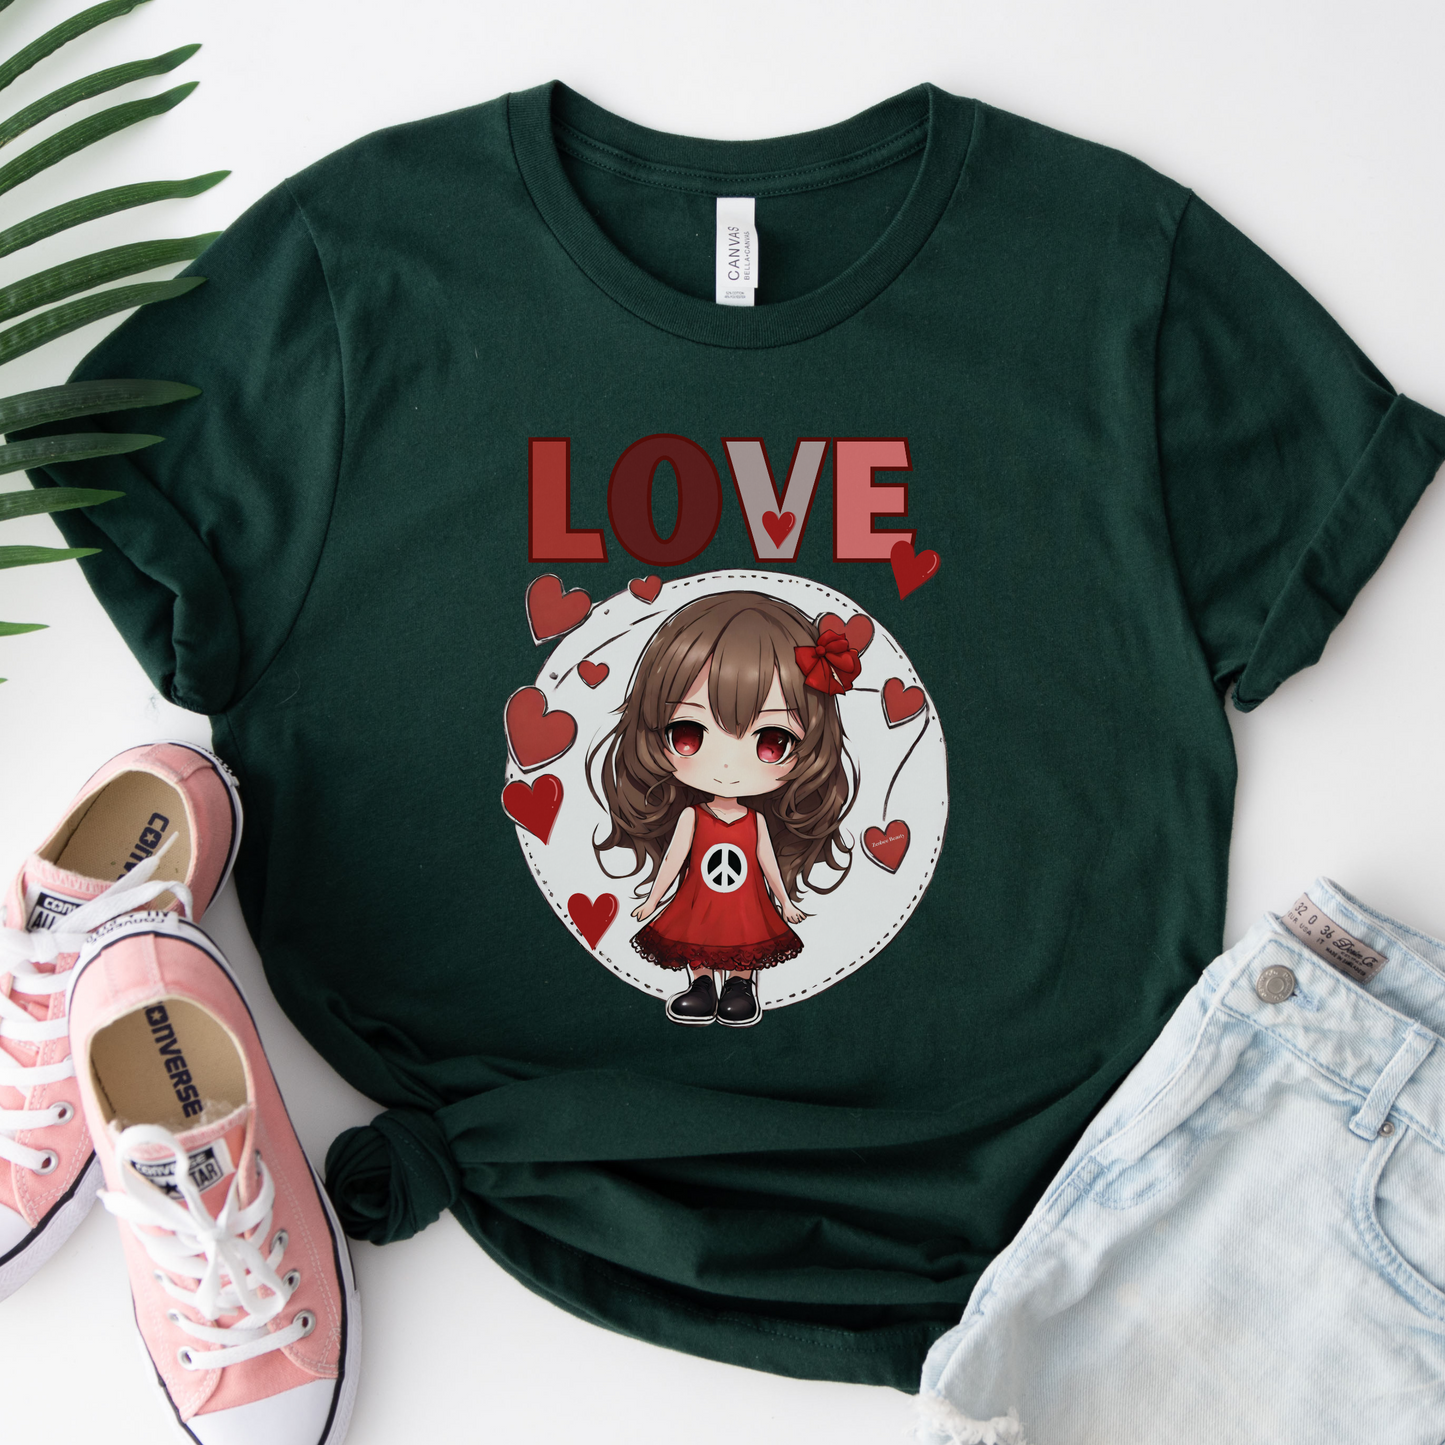 Valentine's Love Tshirt, Valentine shirt, Valentine's day tee, Graphic Tshirt, love t-shirts, Valentine gift, Love Tee, Tshirt for her,